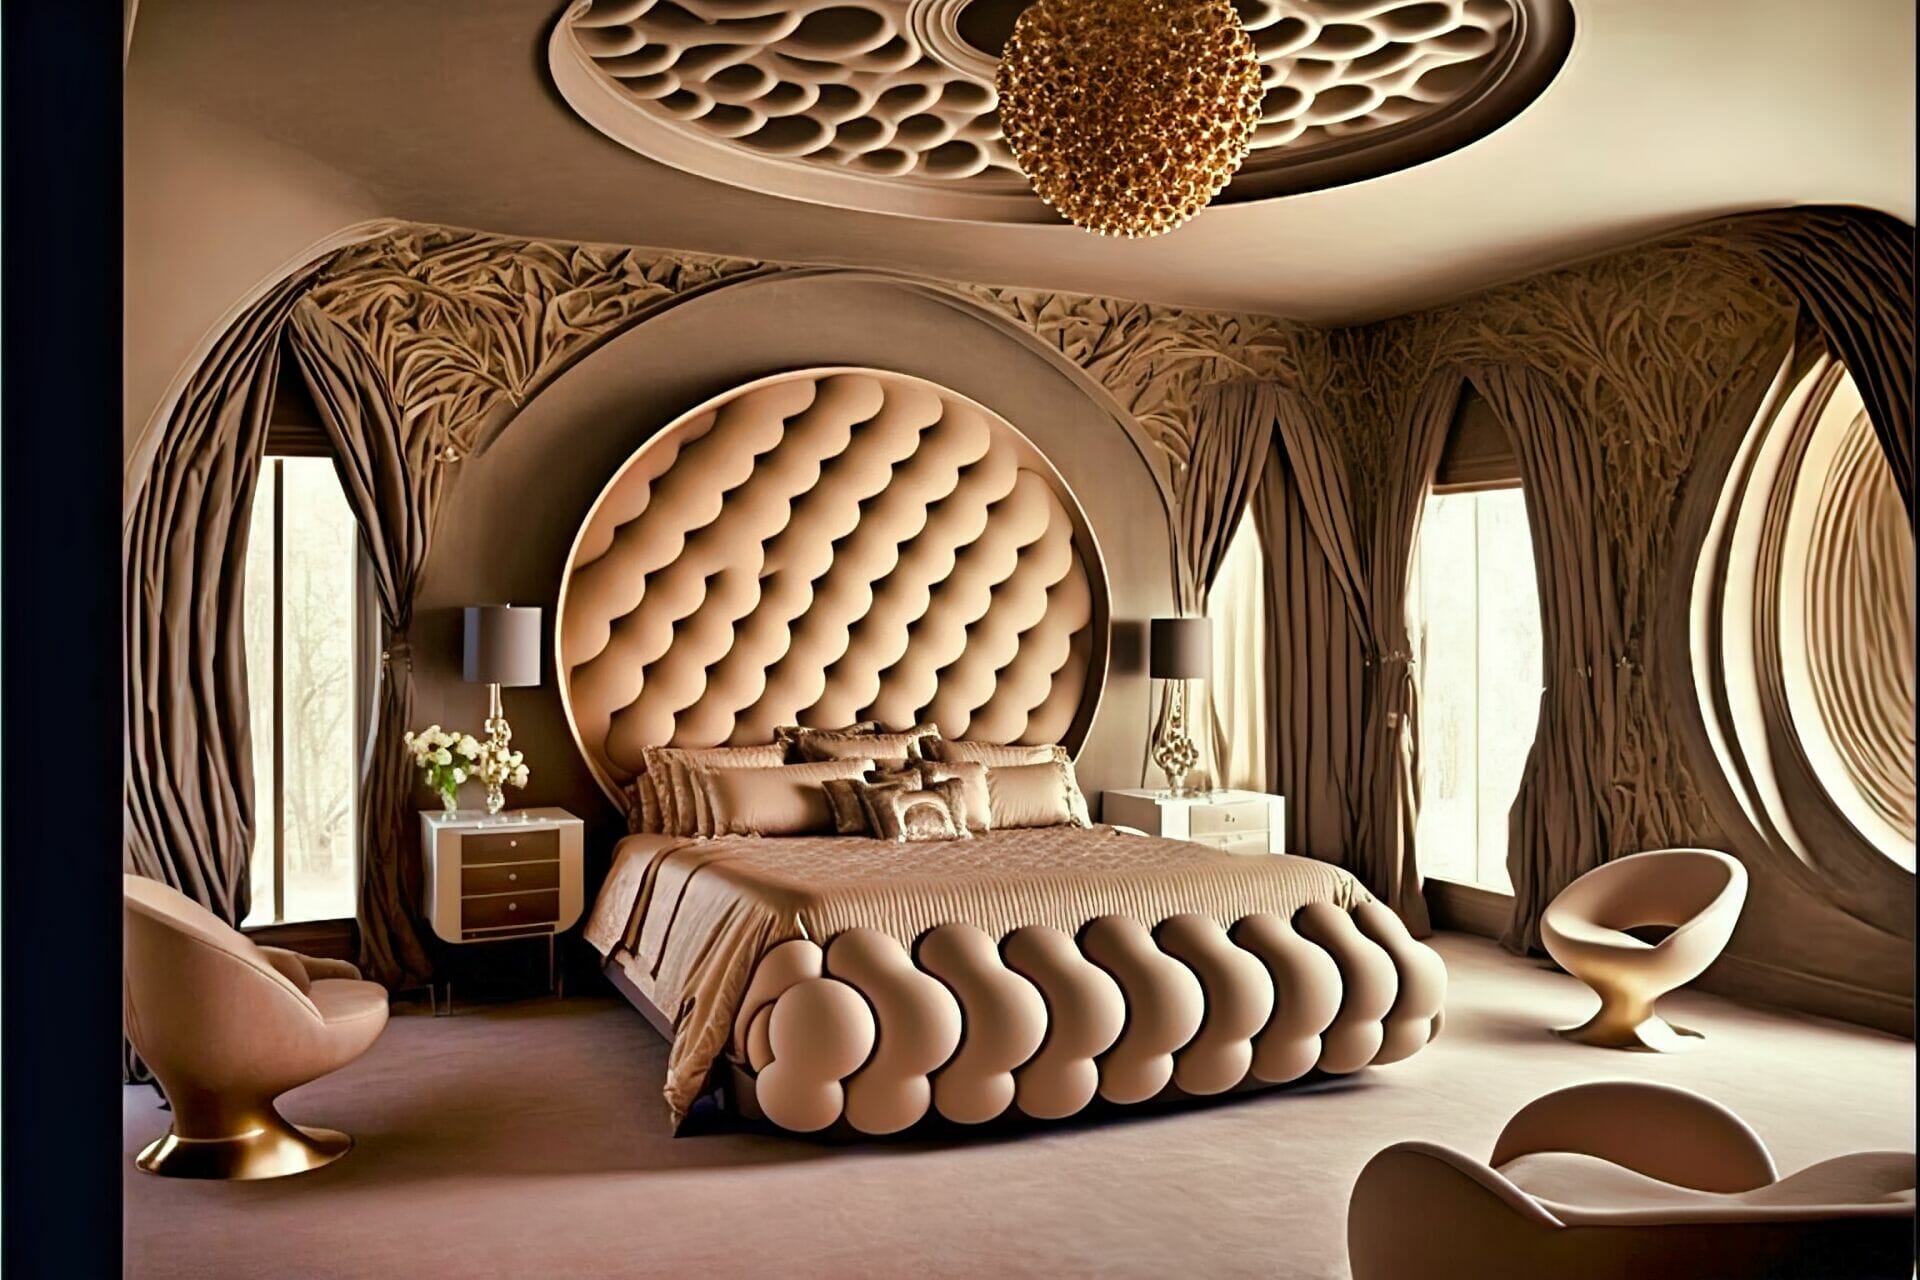 Futurious Style Bedroom With A Relaxing Atmosphere: This Bedroom Features Luxurious Furniture Pieces And Accents, Including A Large Bed With A Tufted Headboard And A Variety Of Gold And Silver Furniture Pieces. The Walls And Ceiling Are Painted A Warm Taupe, And The Floor Is Made Up Of Plush Carpeting.